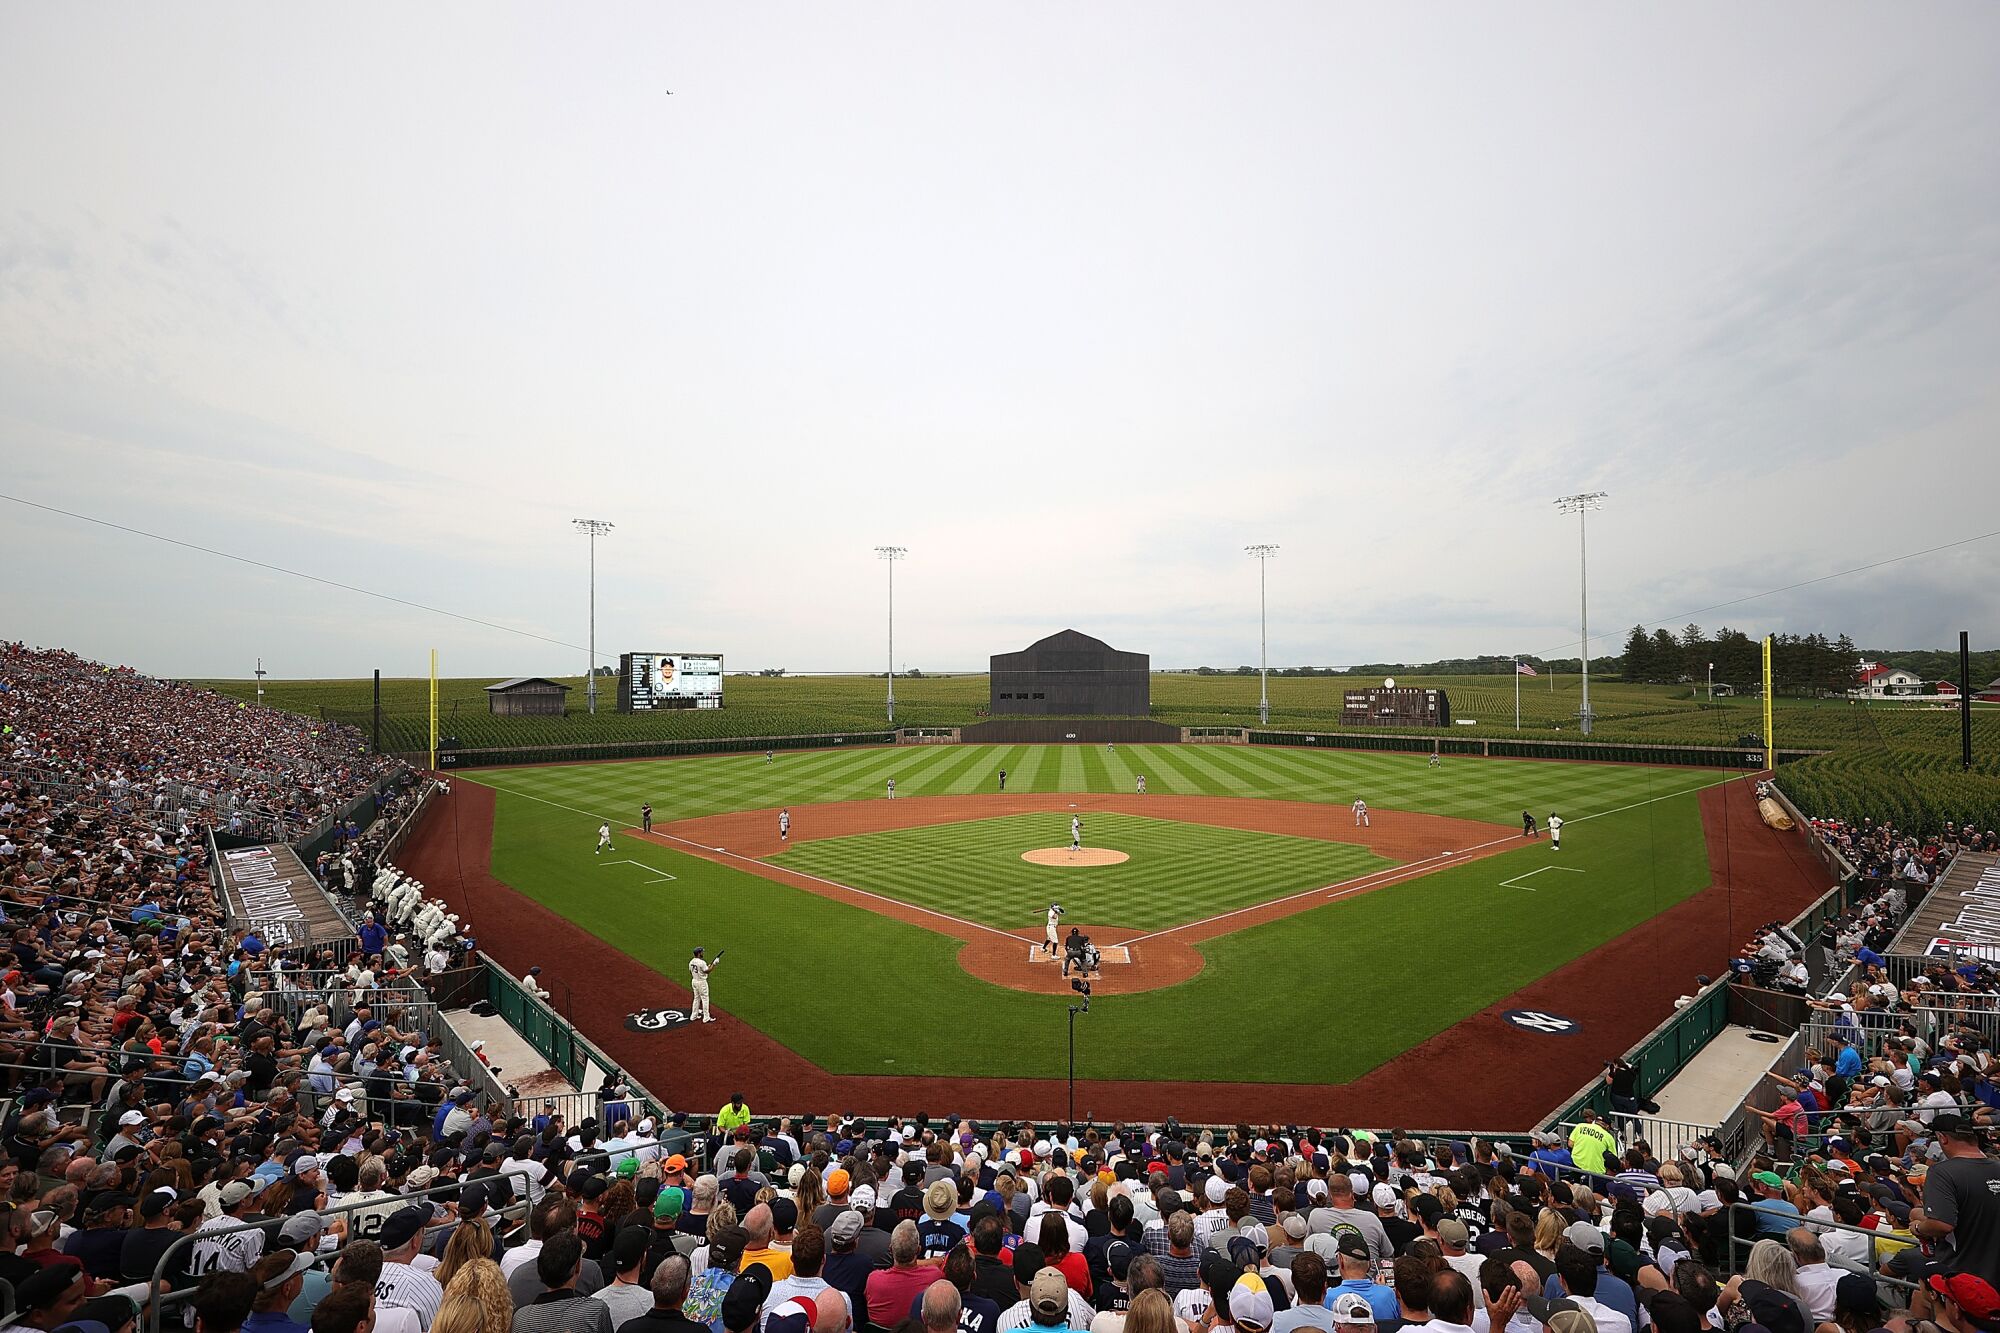 A general view of the Field of Dreams diamond during the first inning between the White Sox and Yankees.